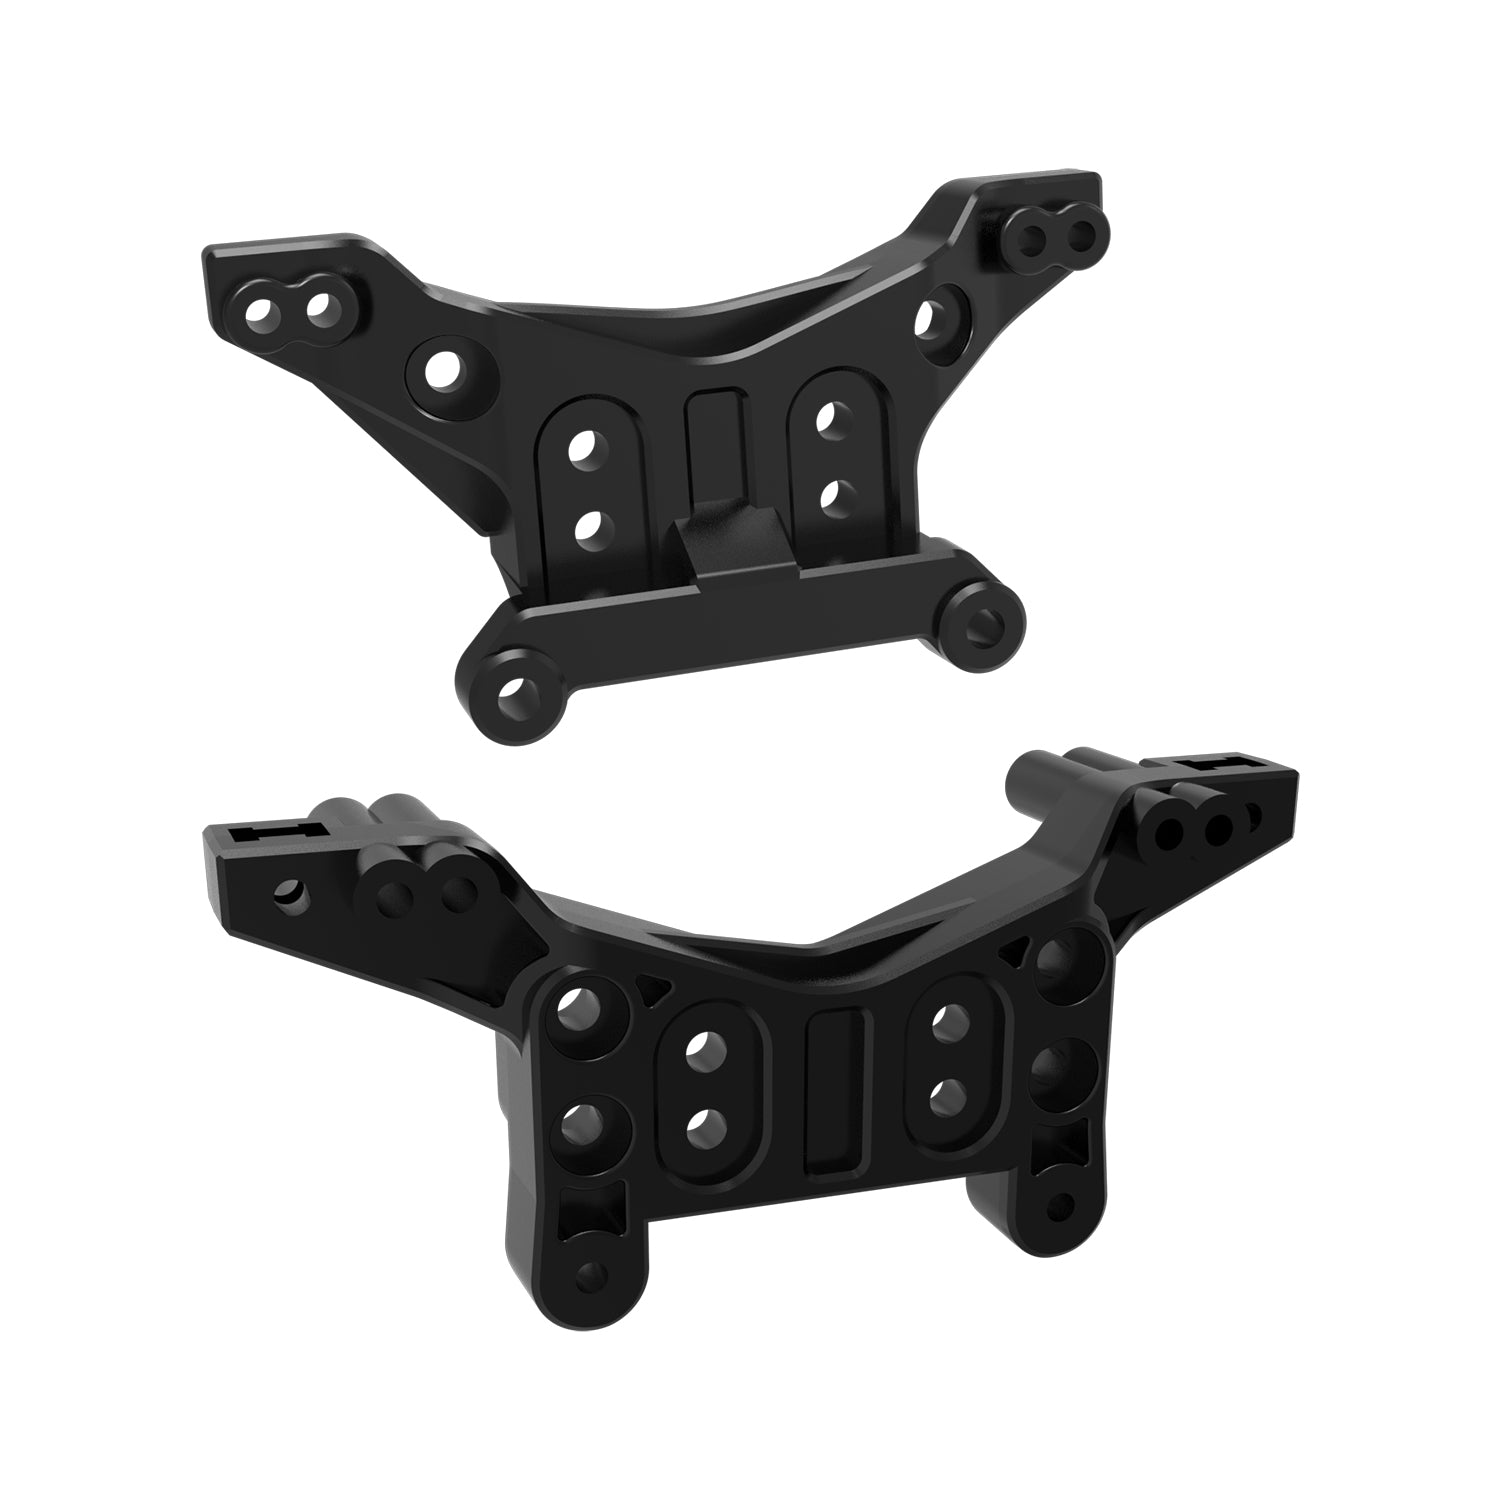 1 set of Front & Rear Body Mount for 1/16 Remote Control Truck Crossy / Sand Storm / Tornado